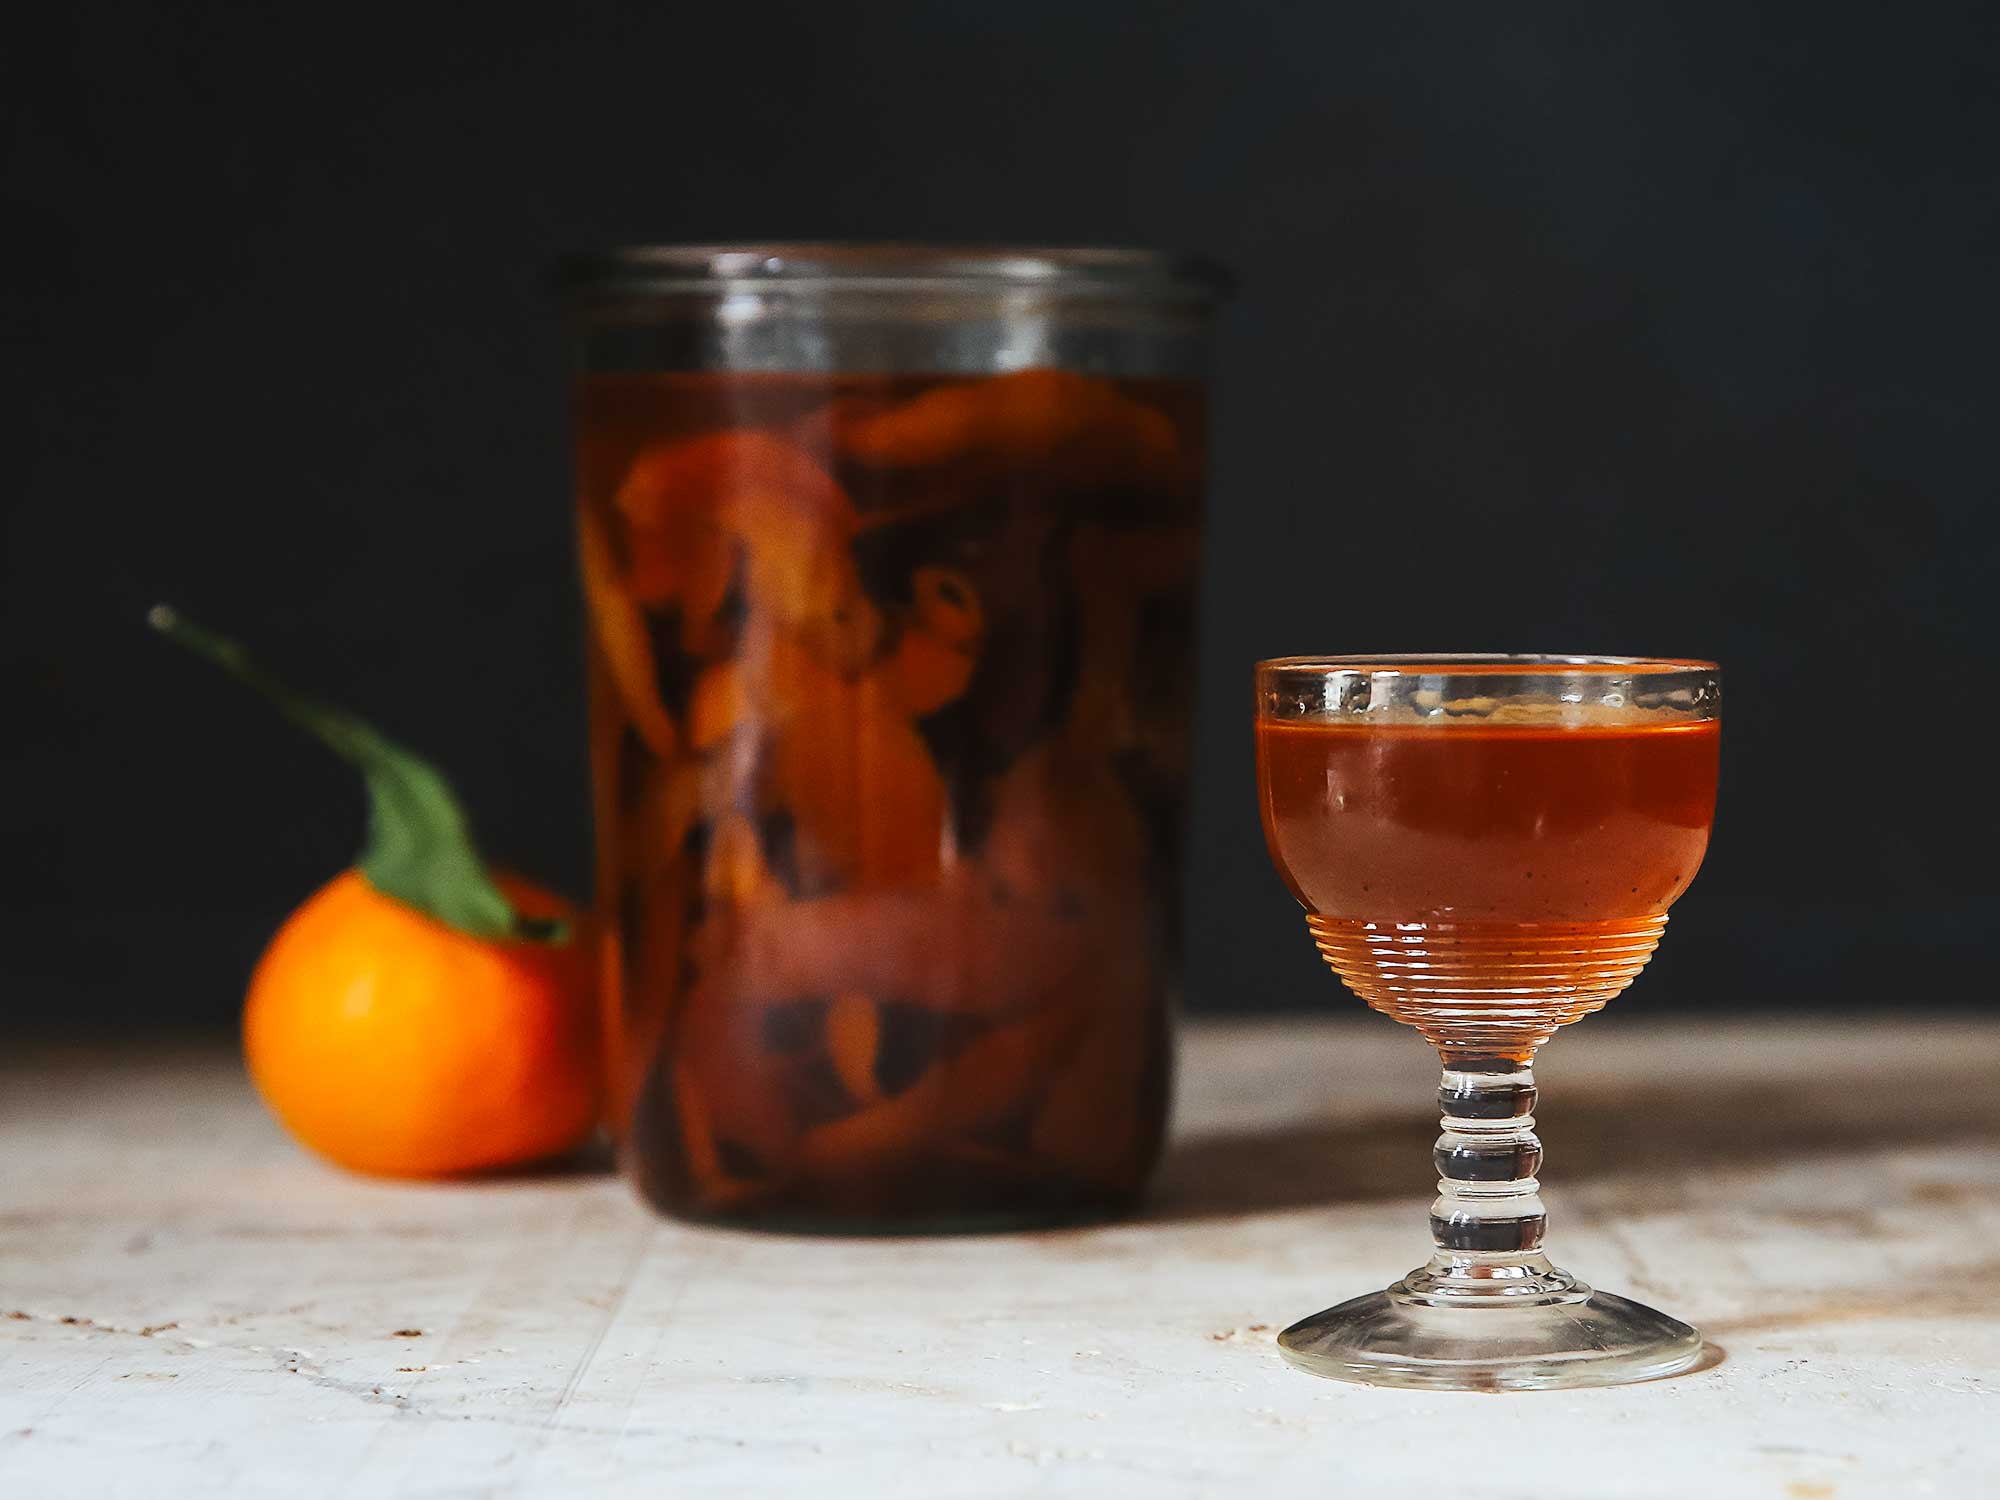 Make Orange-Rum Liqueur to Give the Gift of Caribbean Tradition